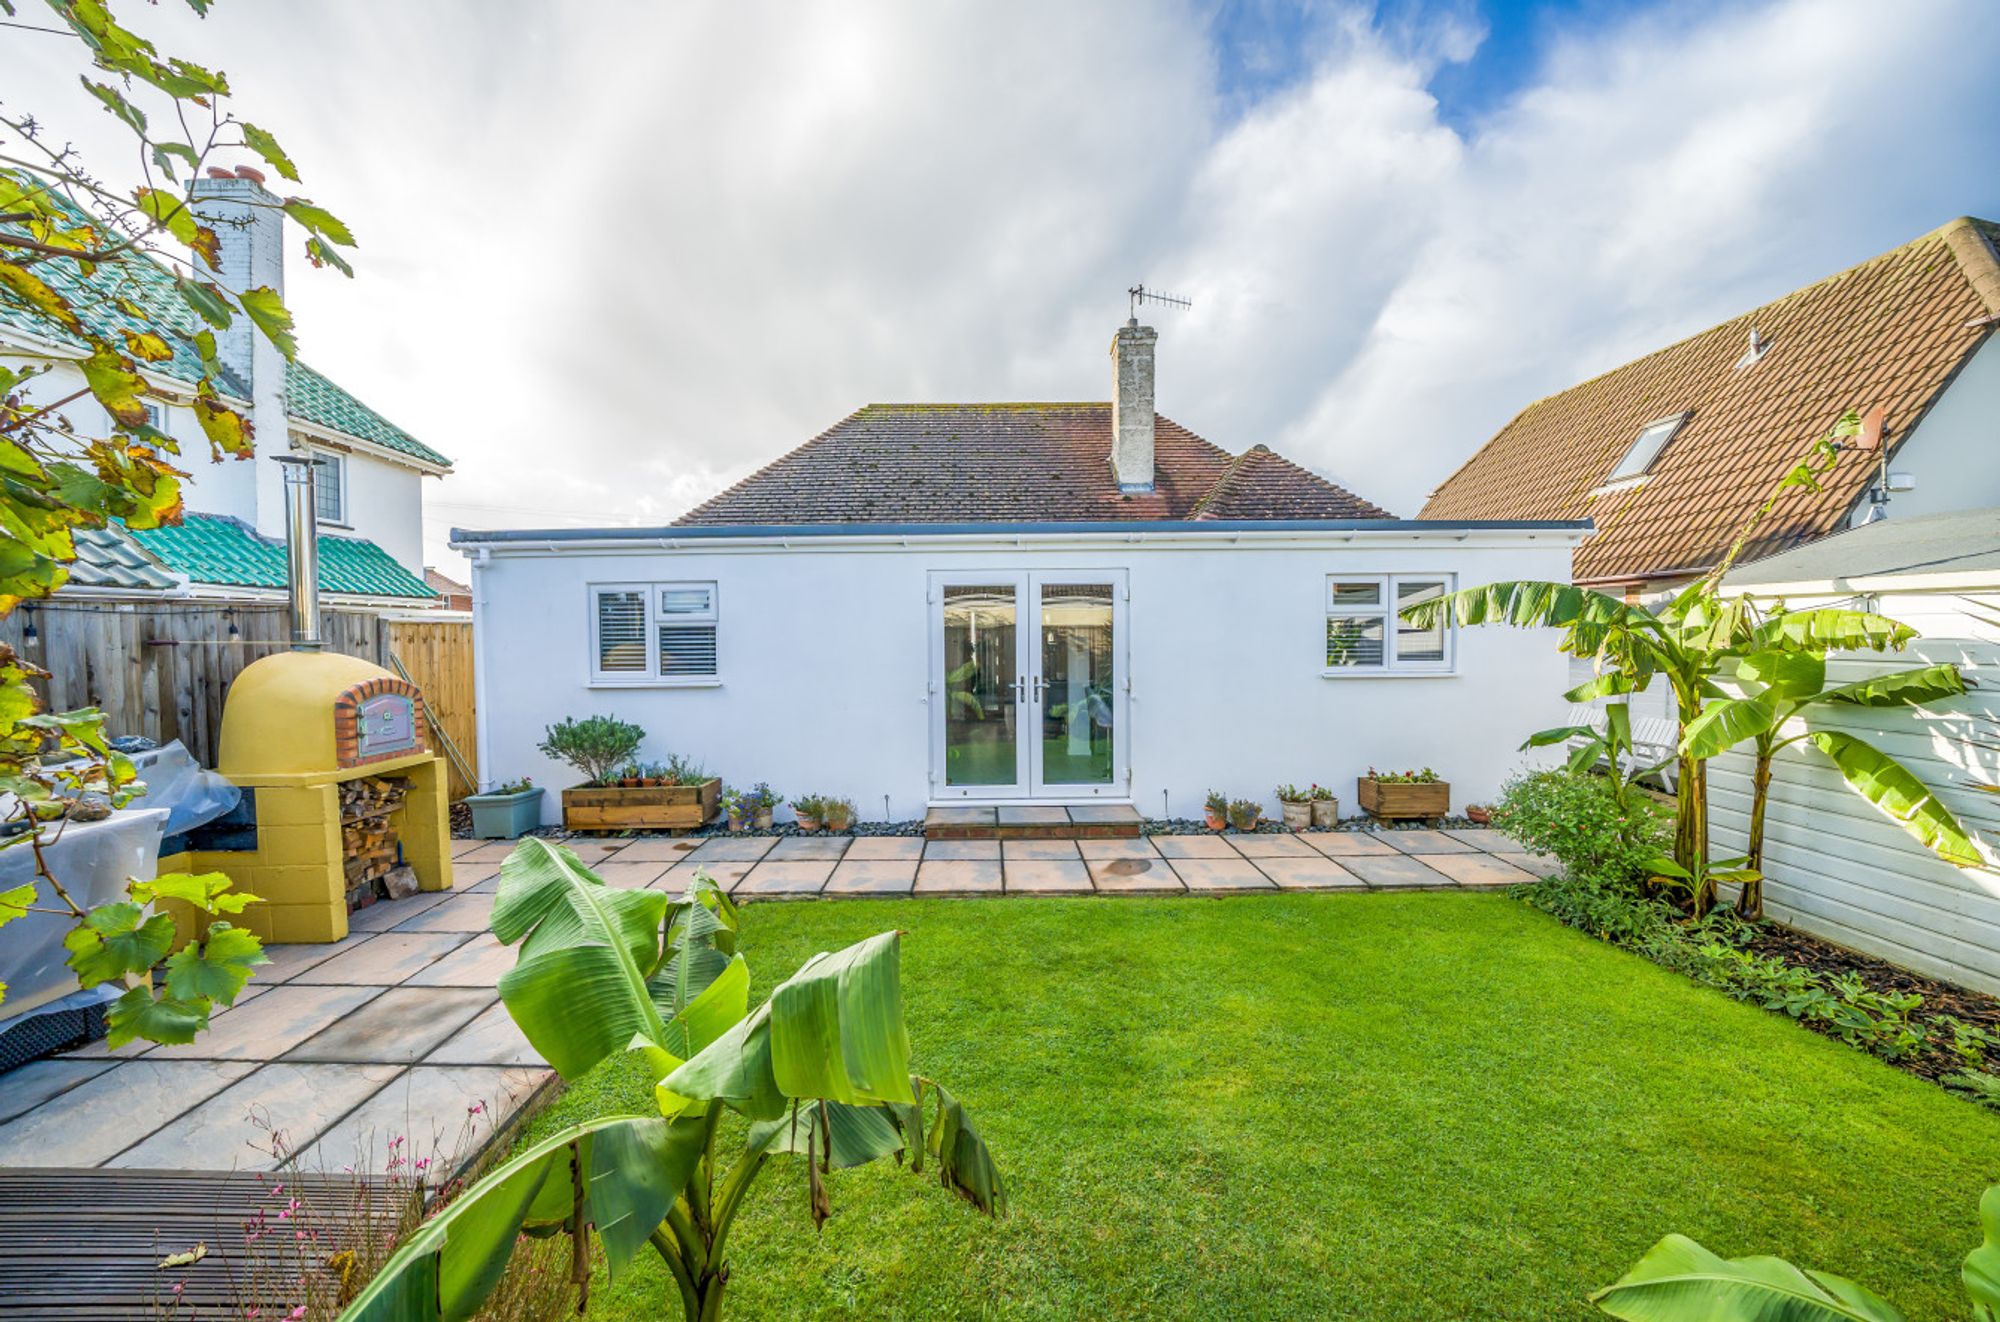 Seal Road, Selsey, PO20